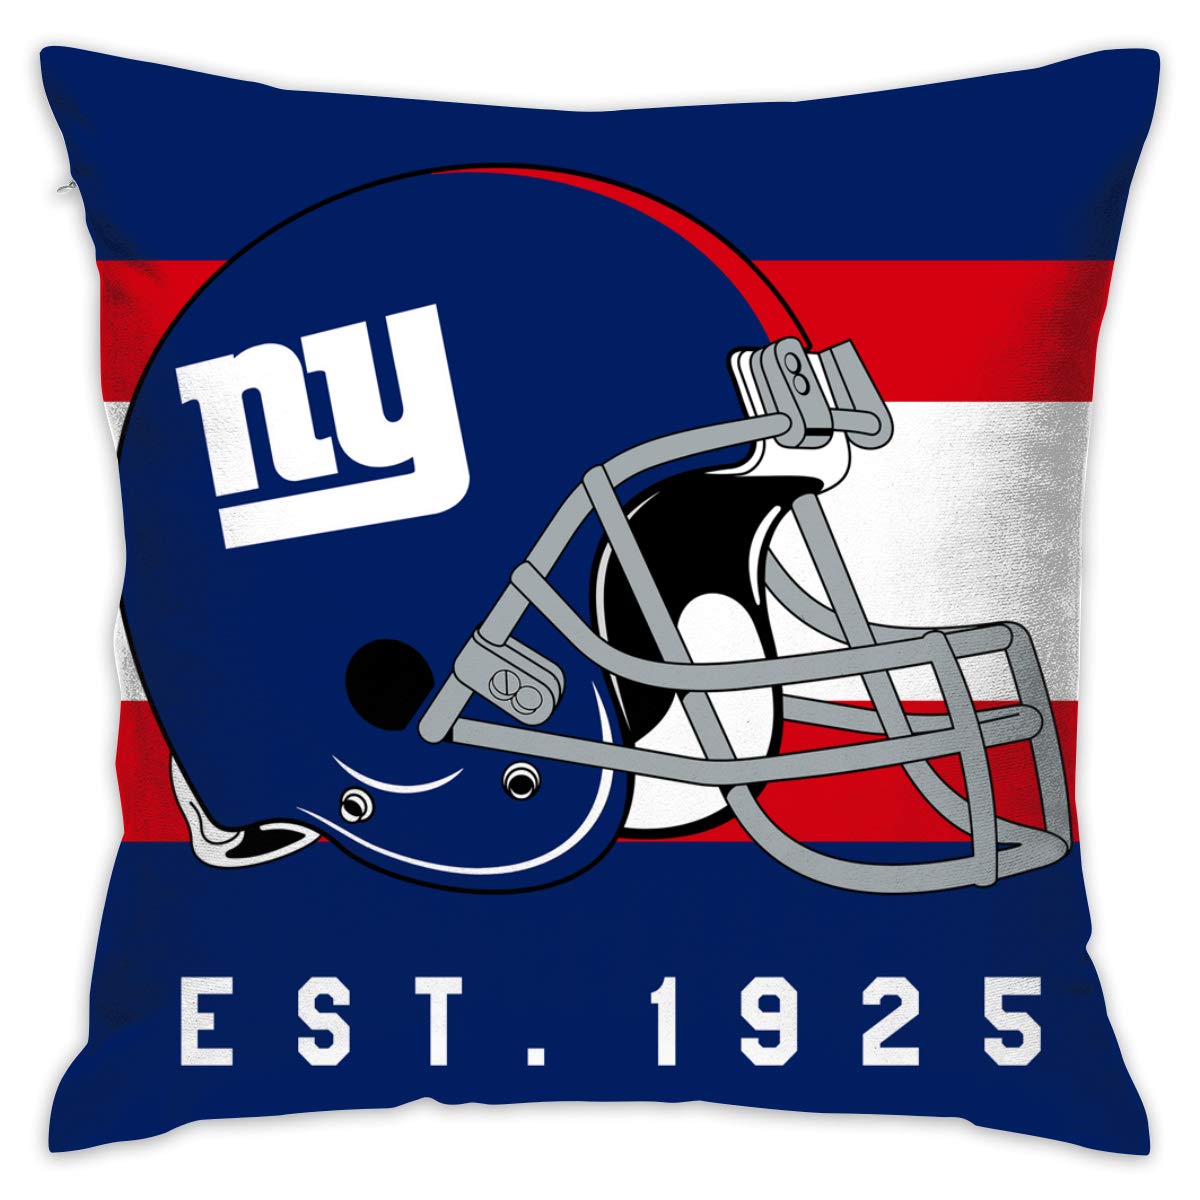 Personalized Football New York Giants Design Pillowcase Decorative Throw Pillow Cover